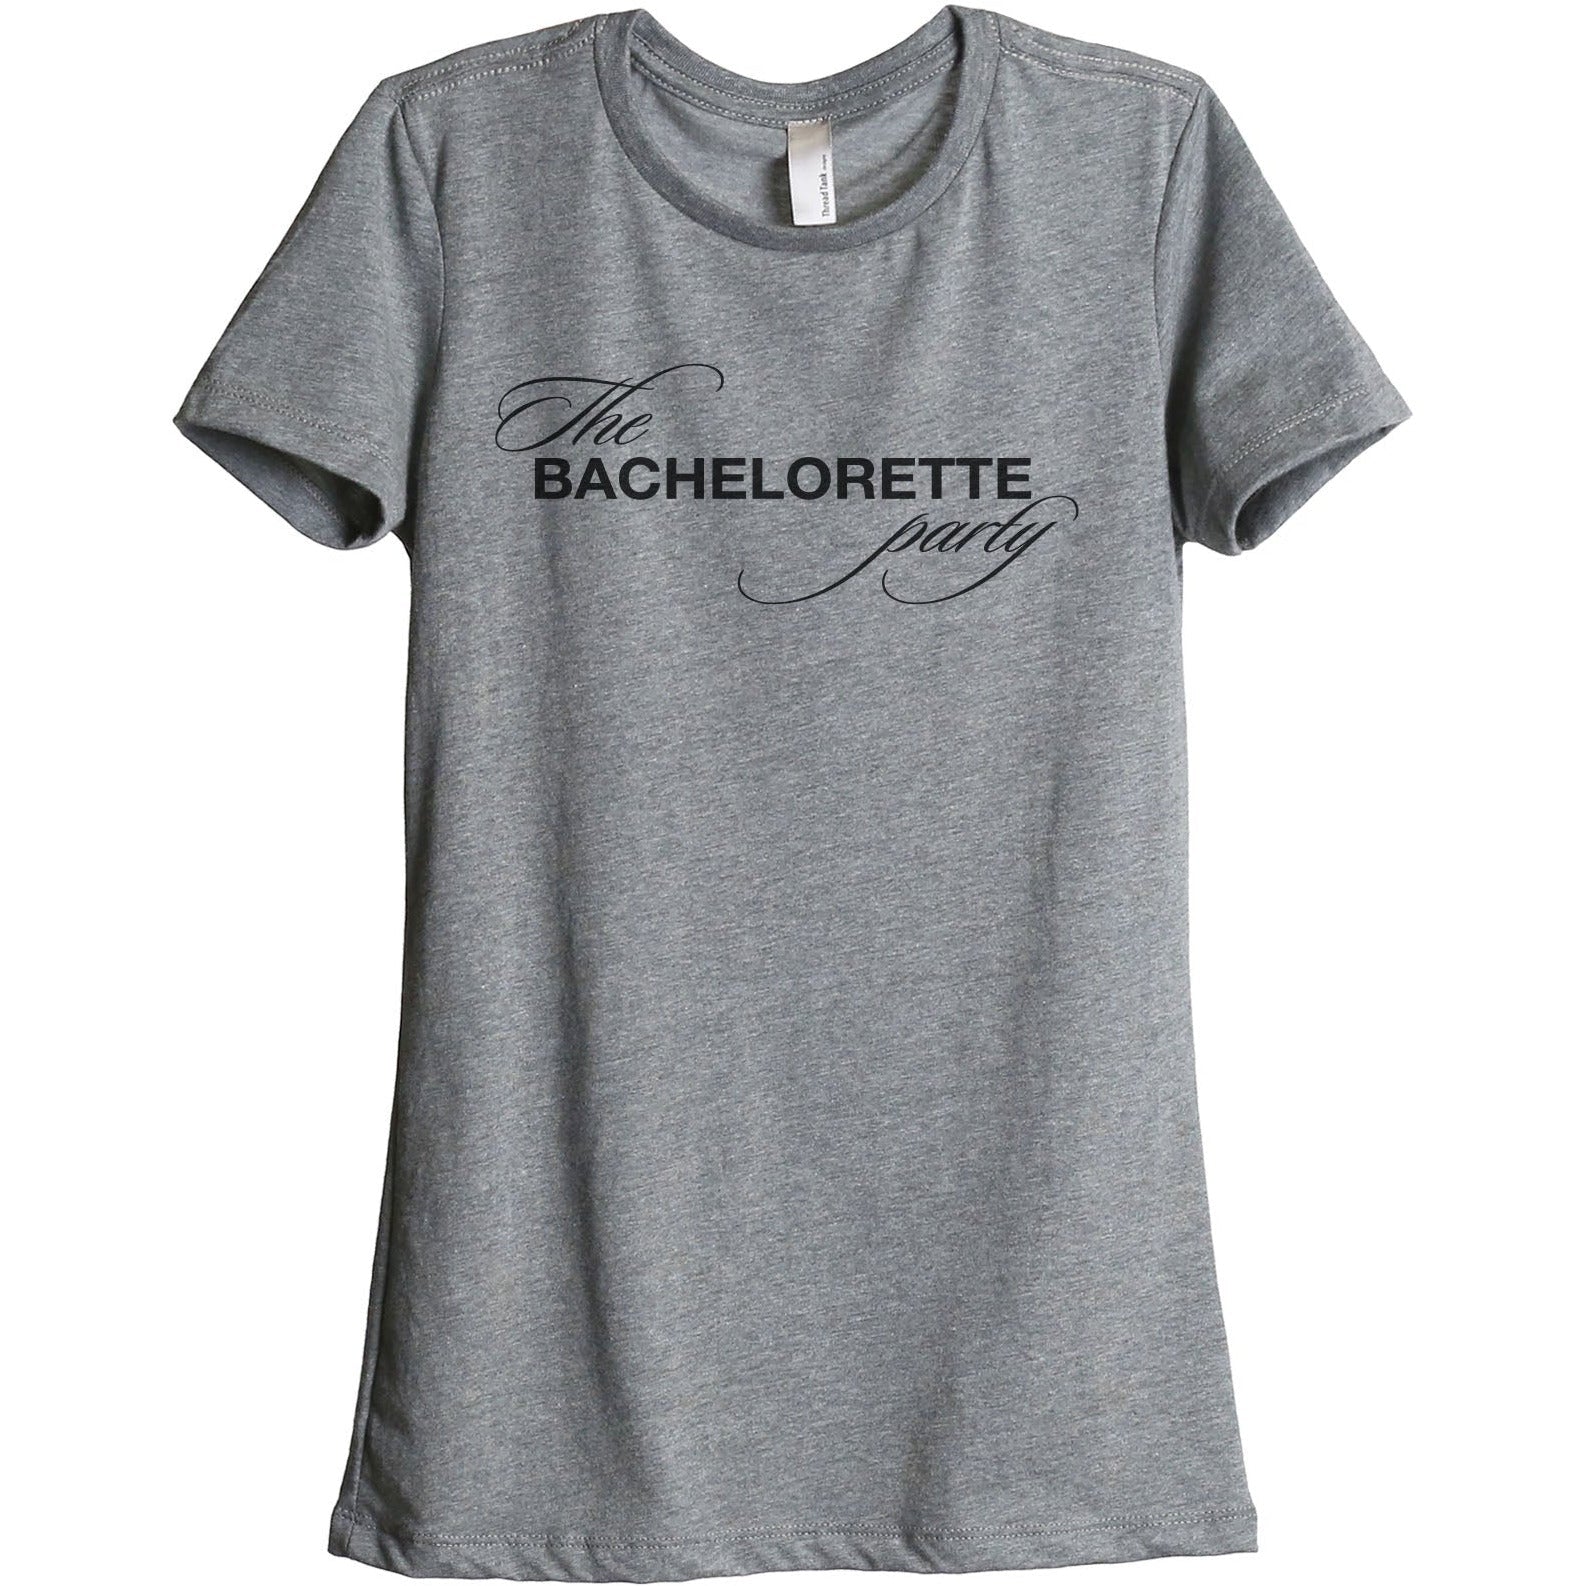 The Bachelorette Party - Stories You Can Wear